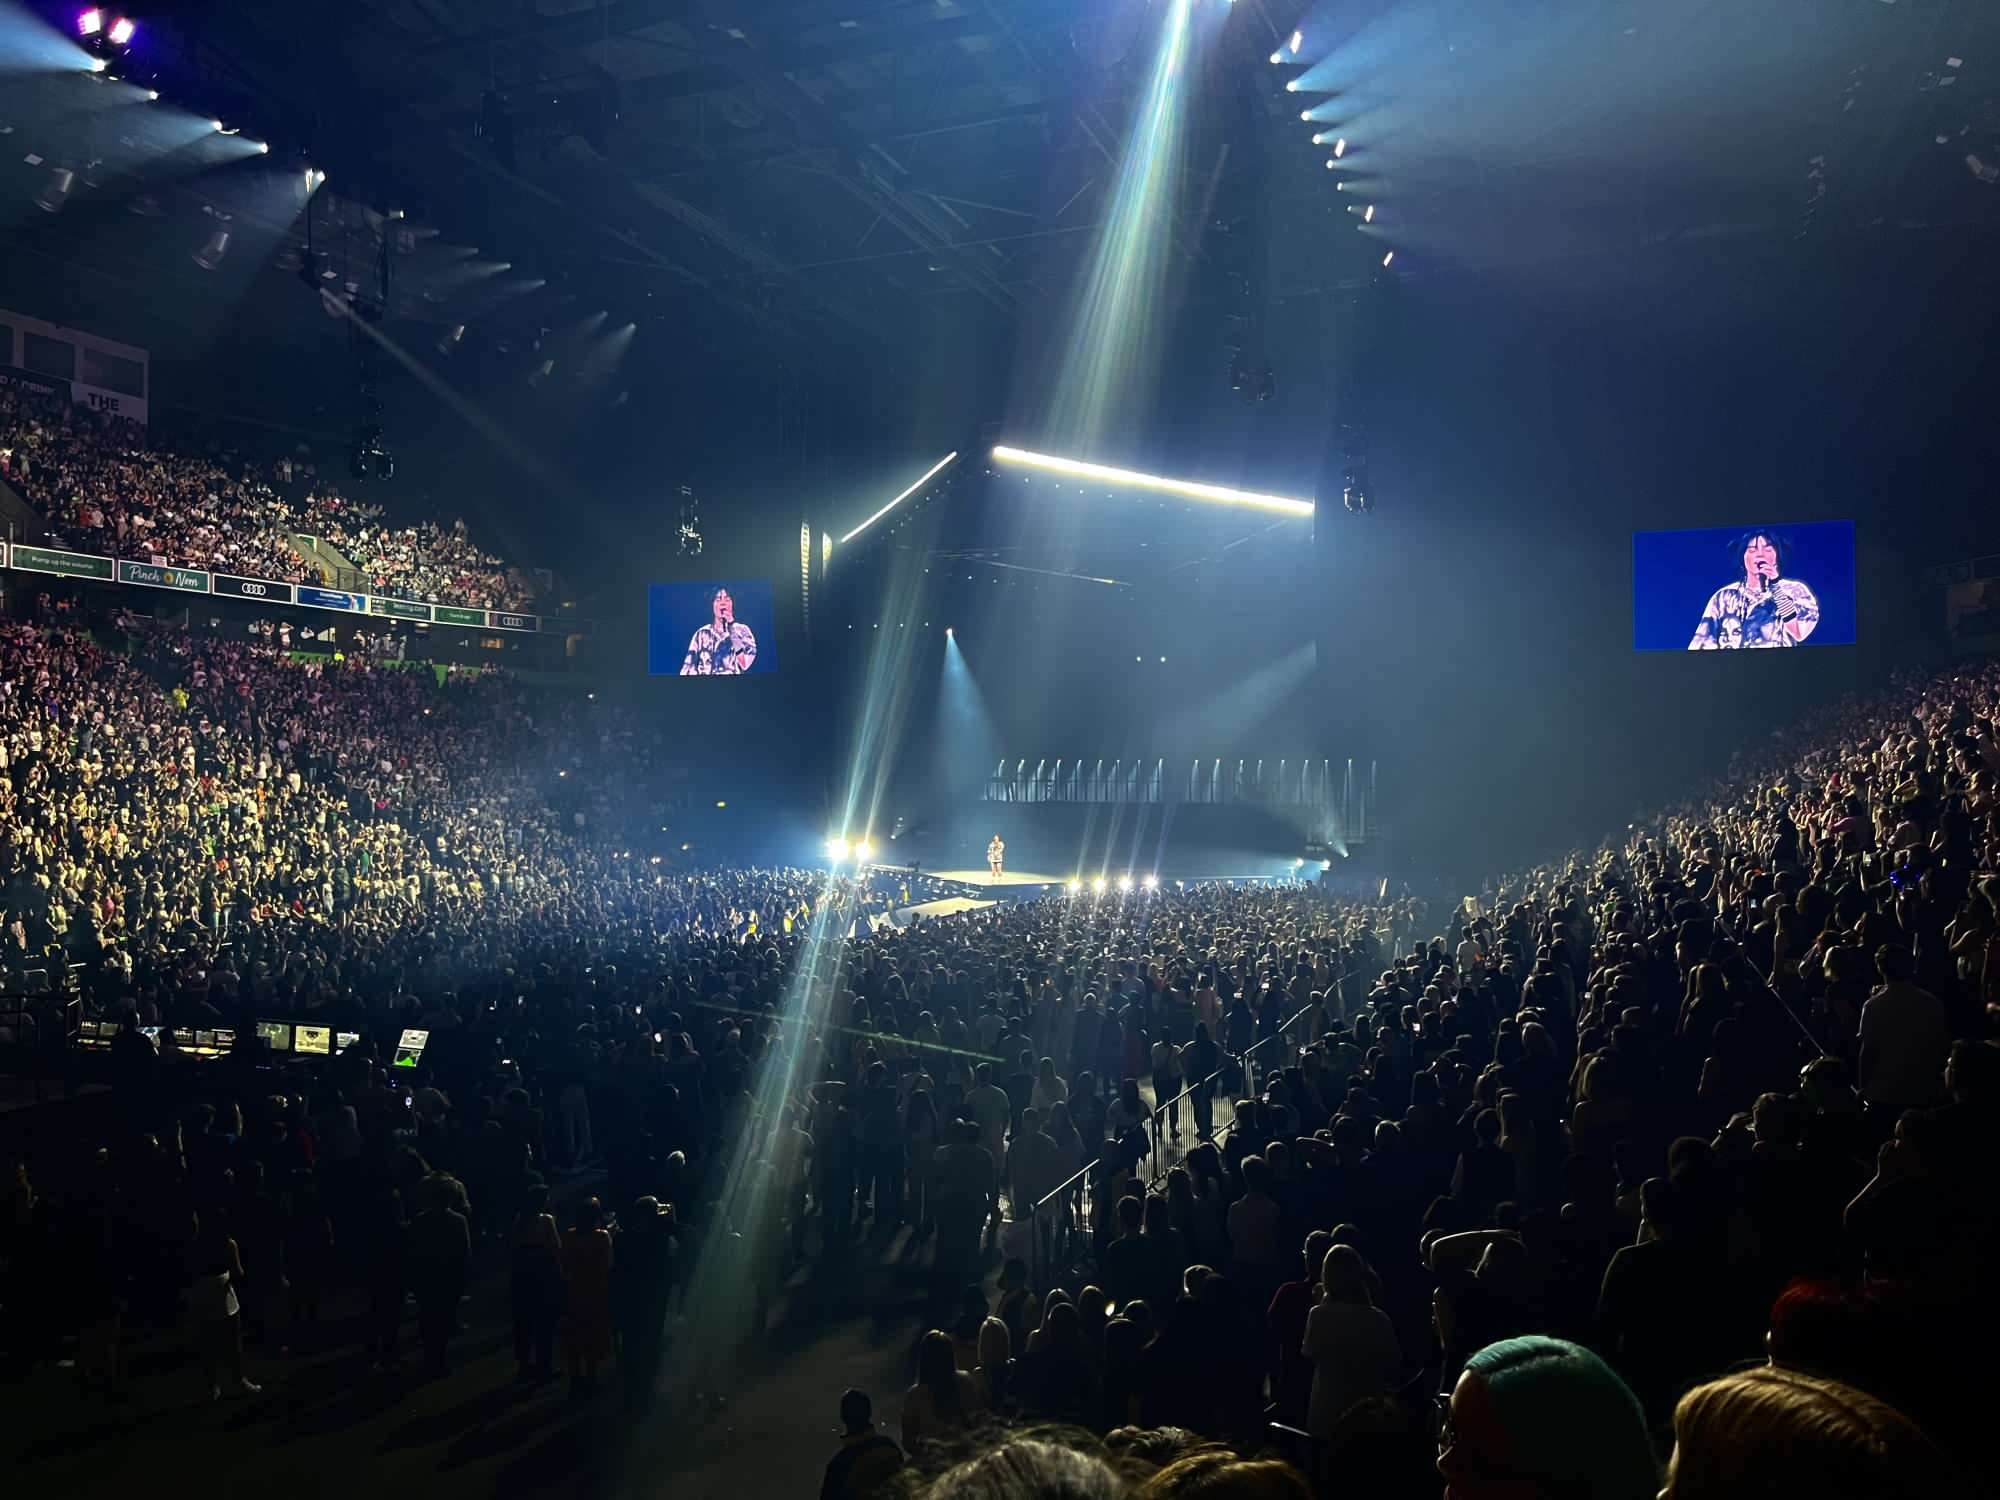 View of Billie Eilish Happier Than Ever World Tour at Manchester Arena from Seat Block 111